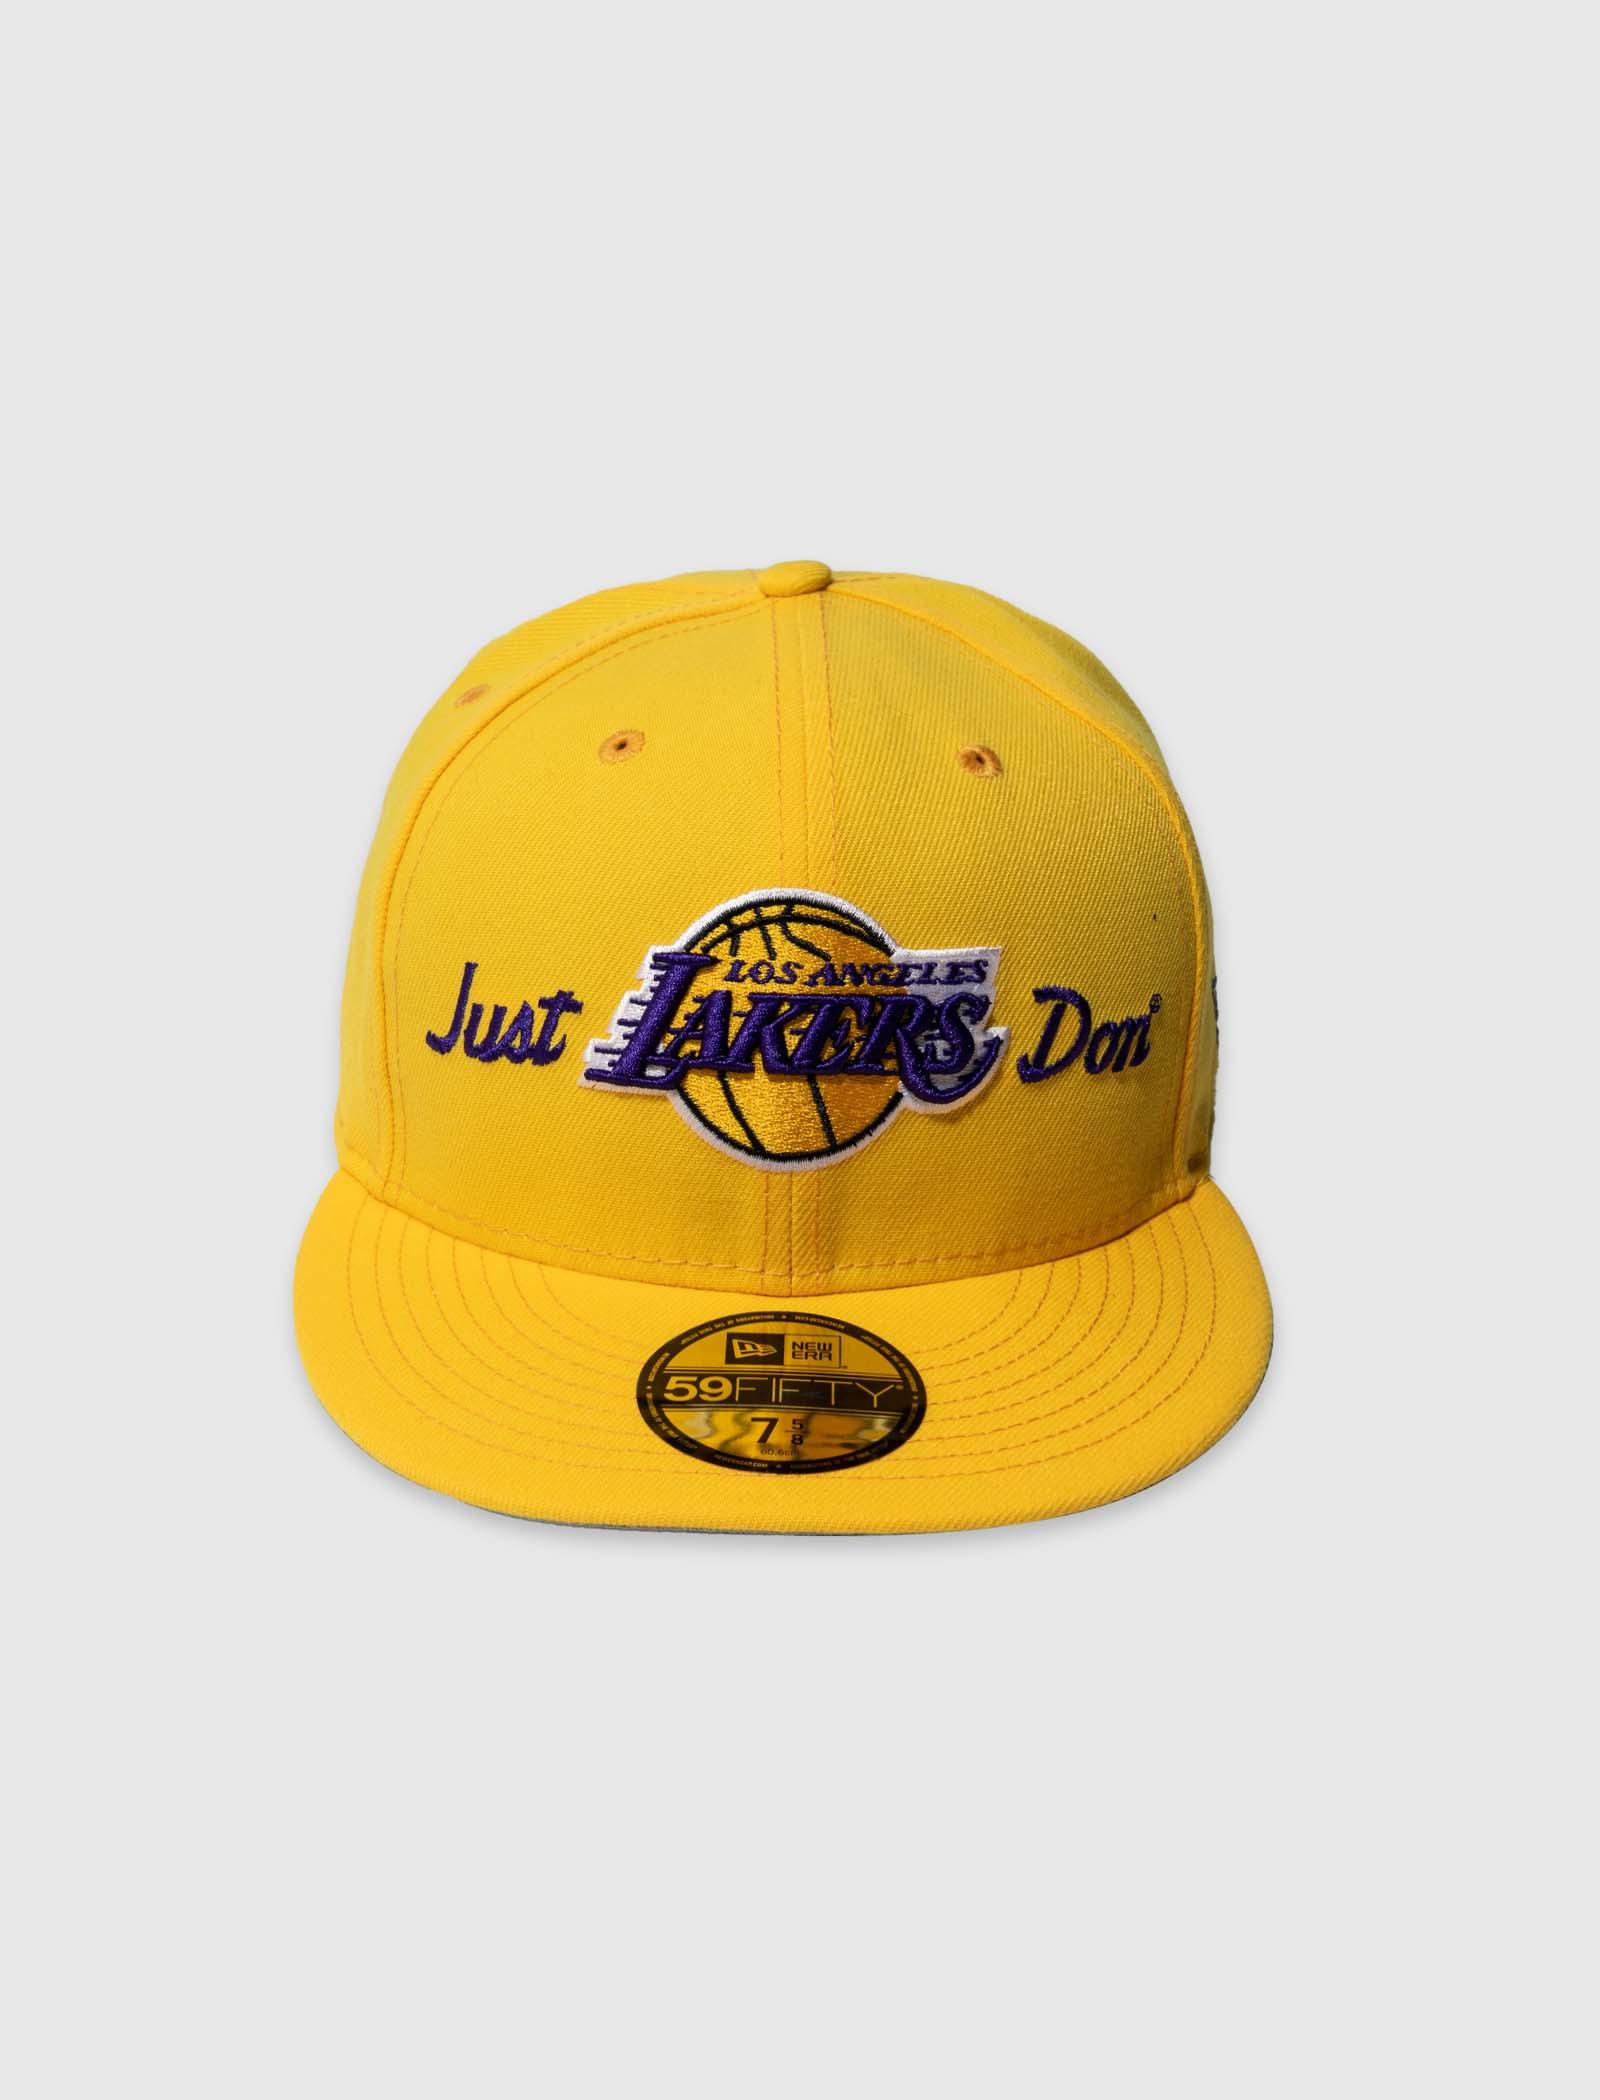 Los Angeles Lakers Just Don hat 5950 (all sizes)-very limited